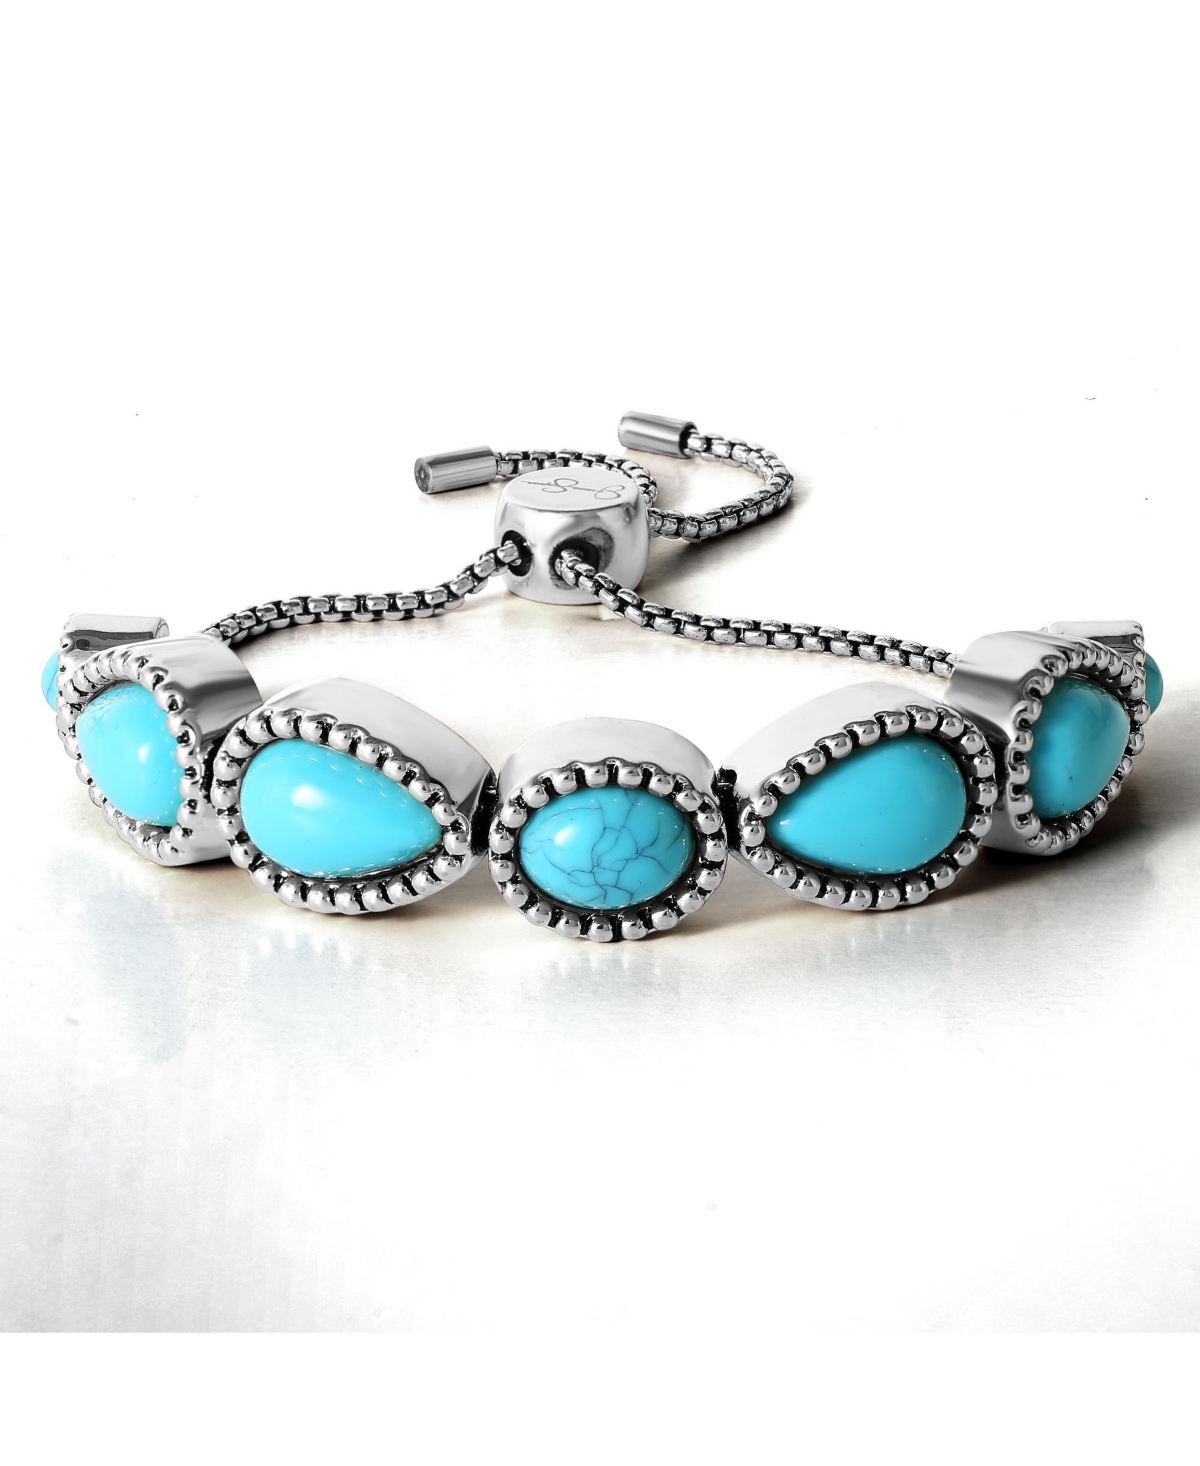 Womens Turquoise Stone Slider Bracelet - Oxidized Gold-Tone or Silver-Tone Lariat Bracelet with Turquoise Accents - Silver